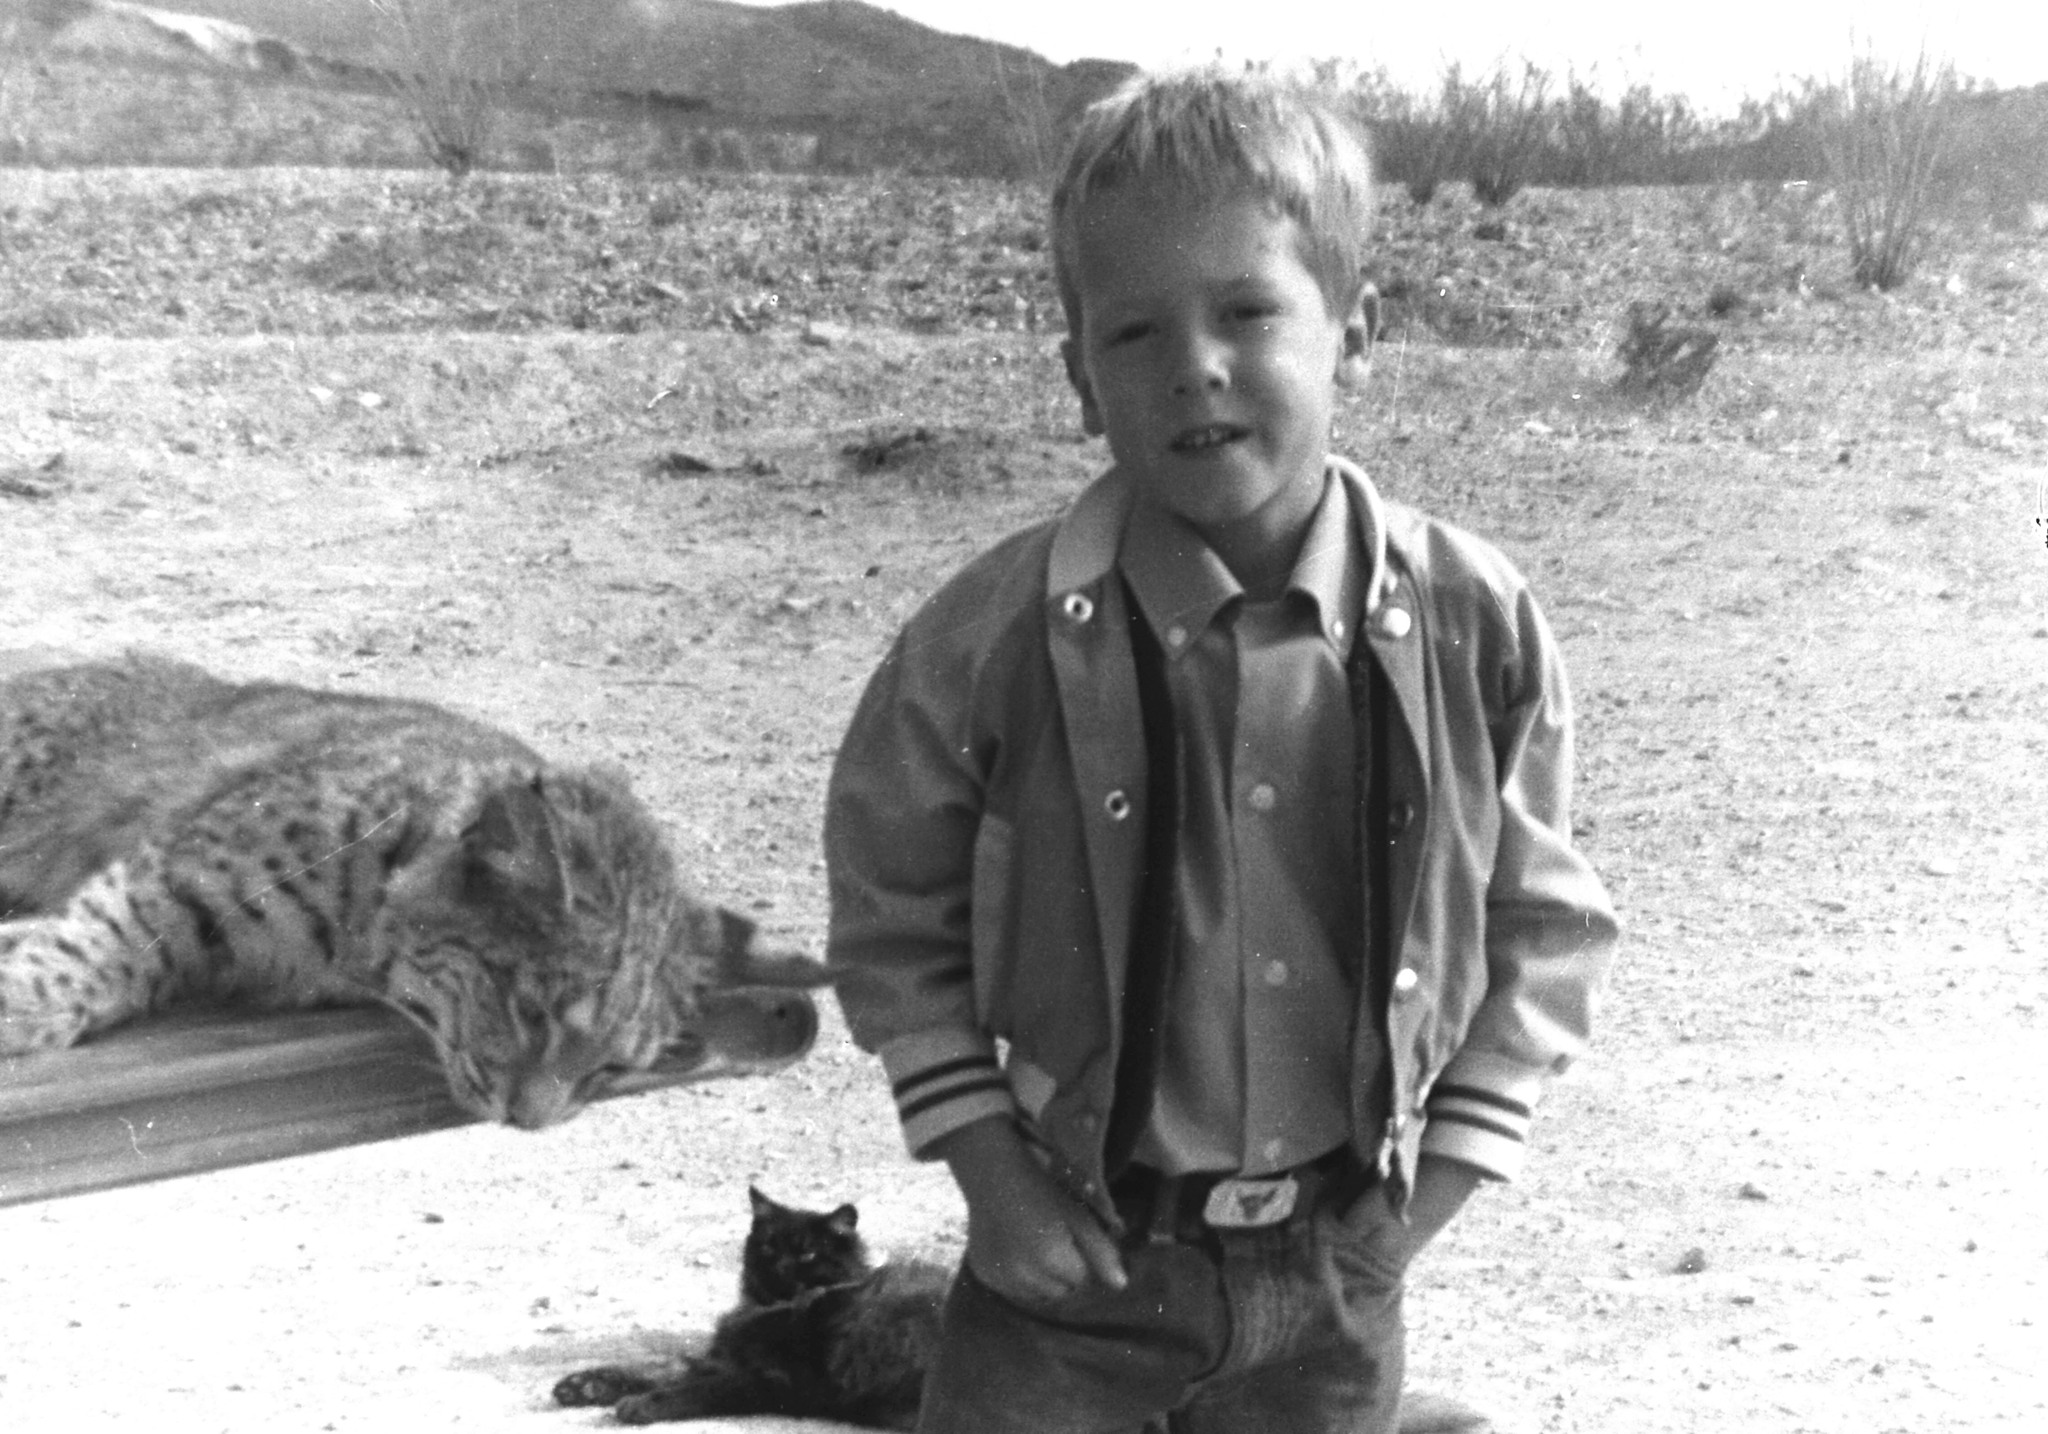 Black and white photo of a young boy looking directly at the camera, with desert scenery behind him.